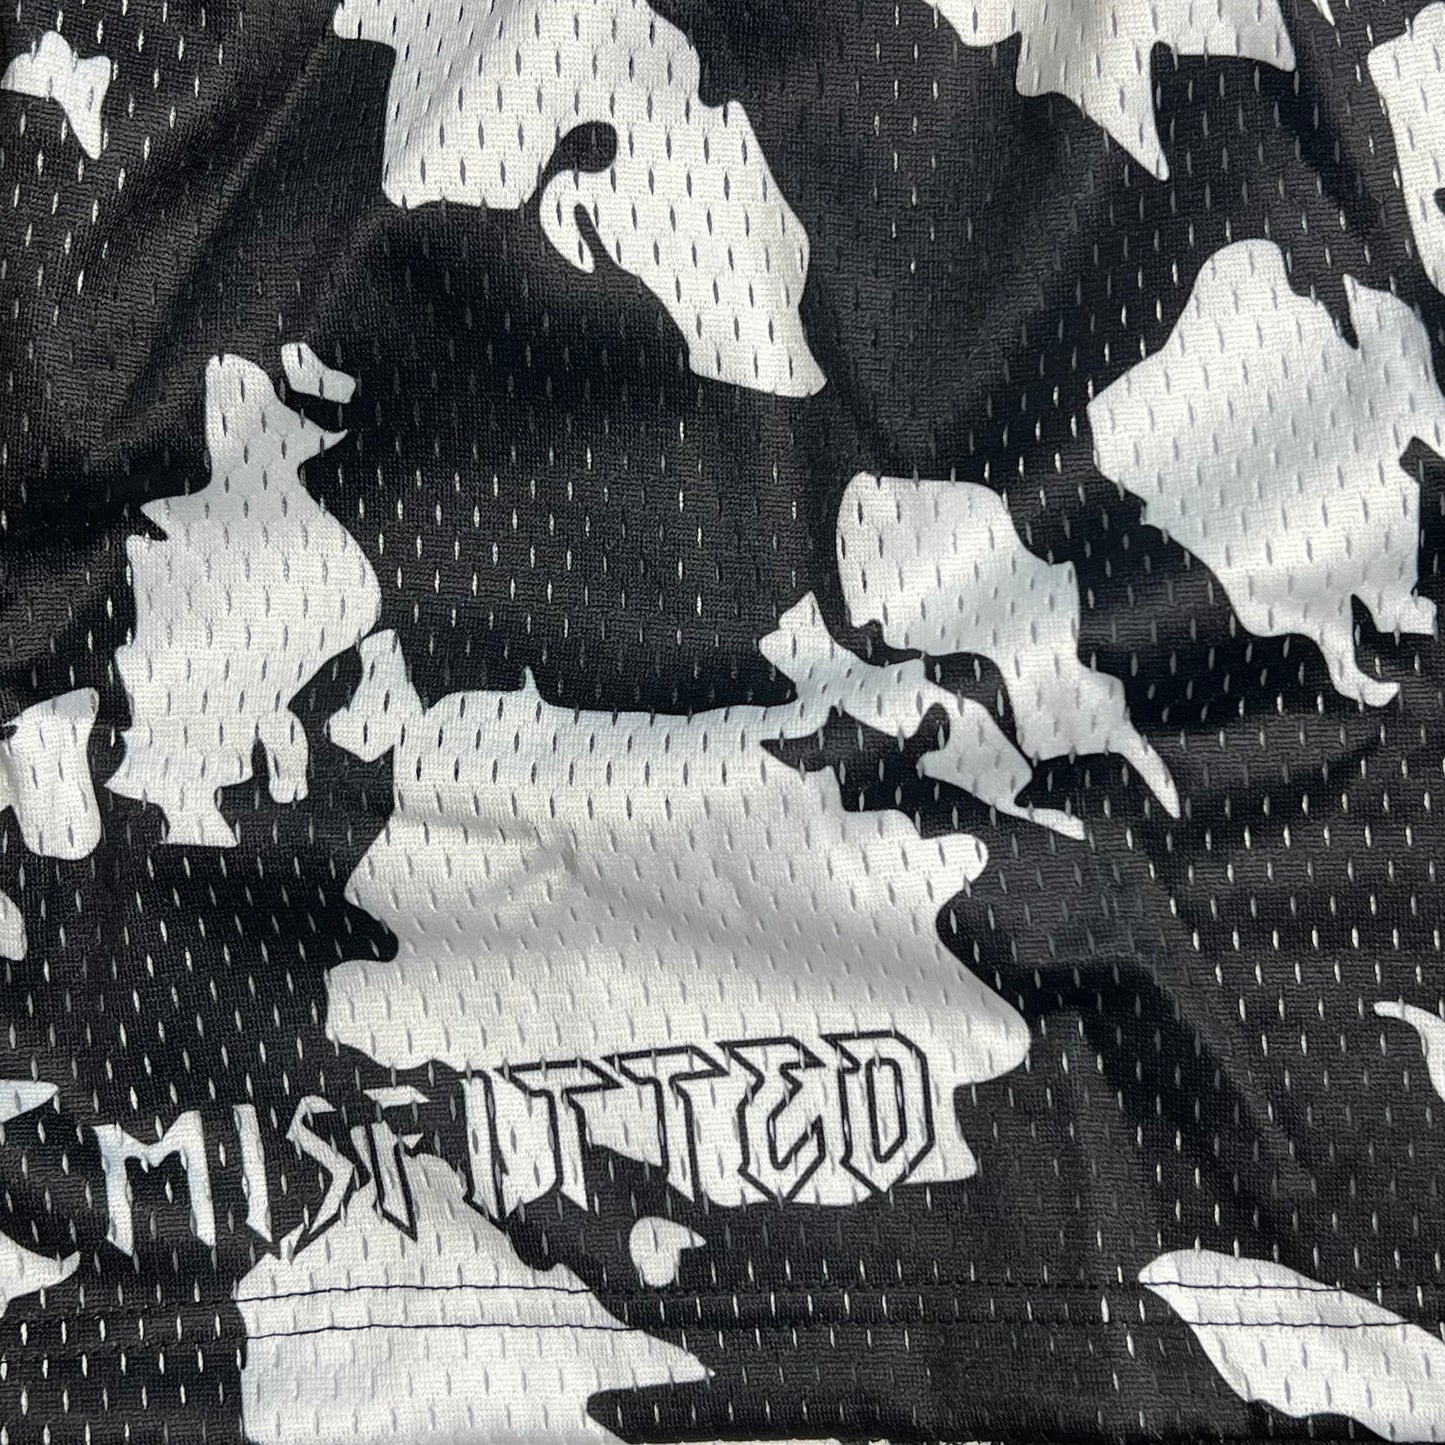 Misfitted Apparel Shorts - Cow Print